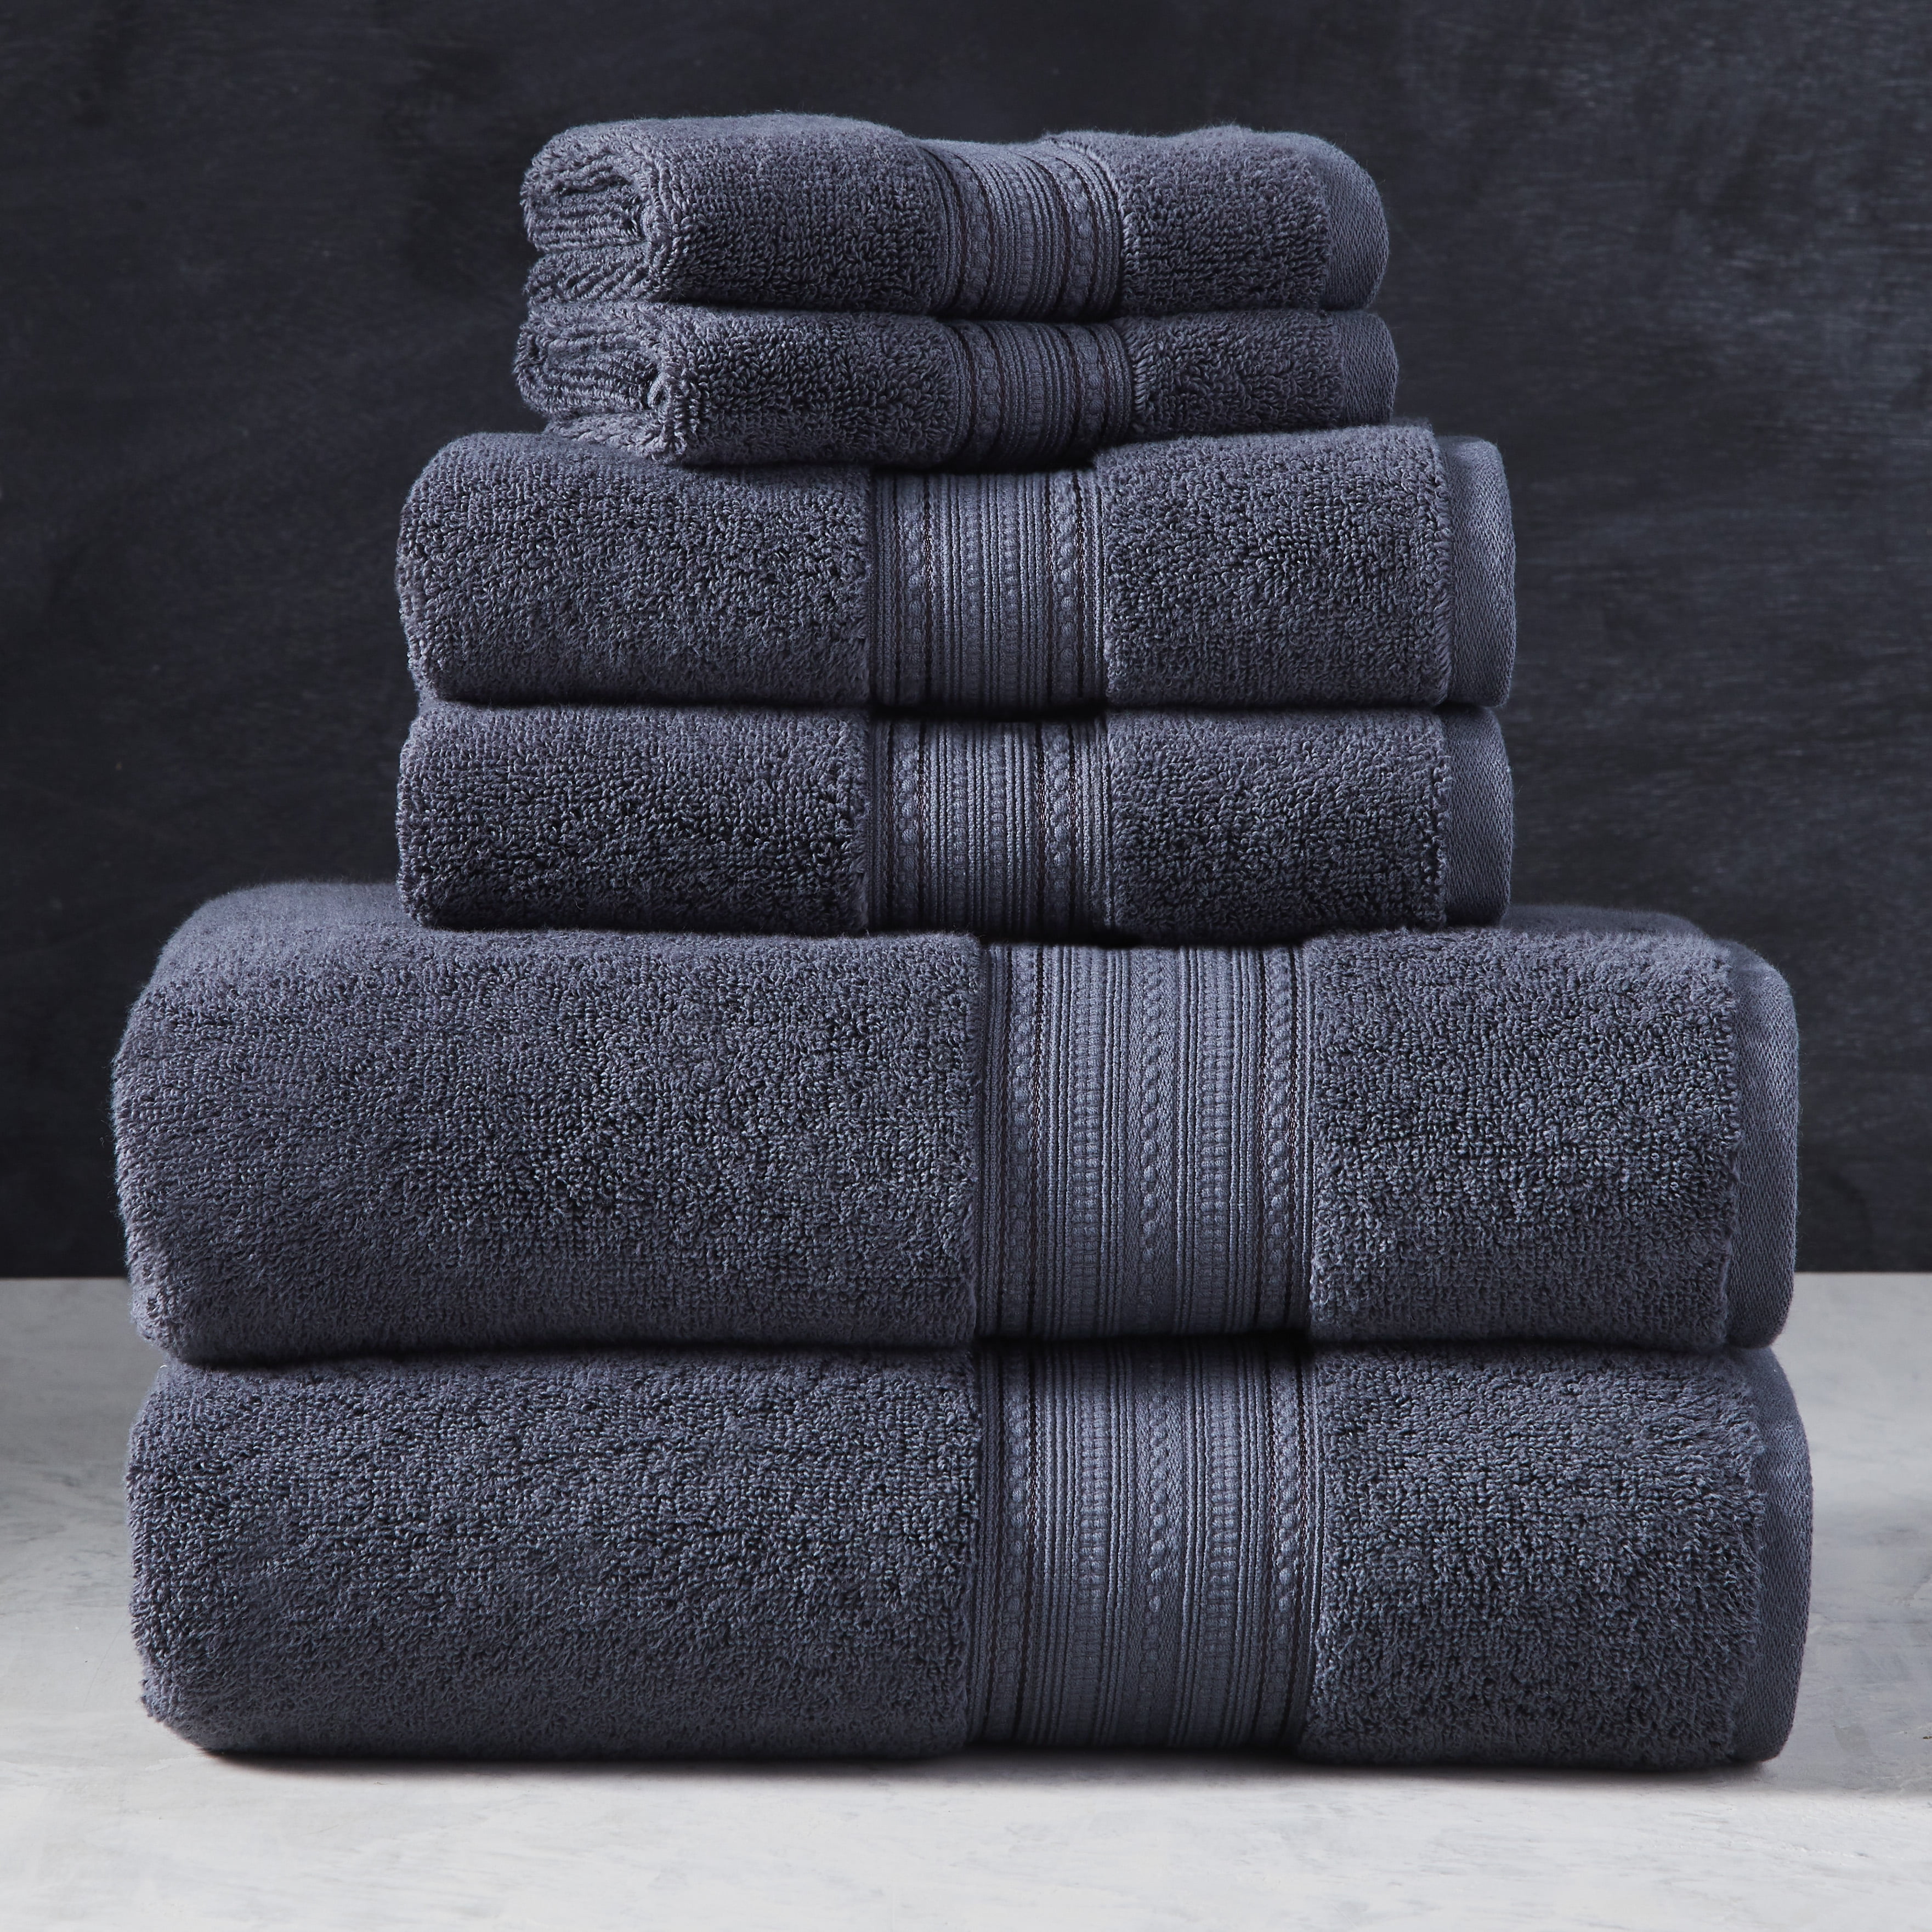 Shadow Towels, The Classic Shadow Towels